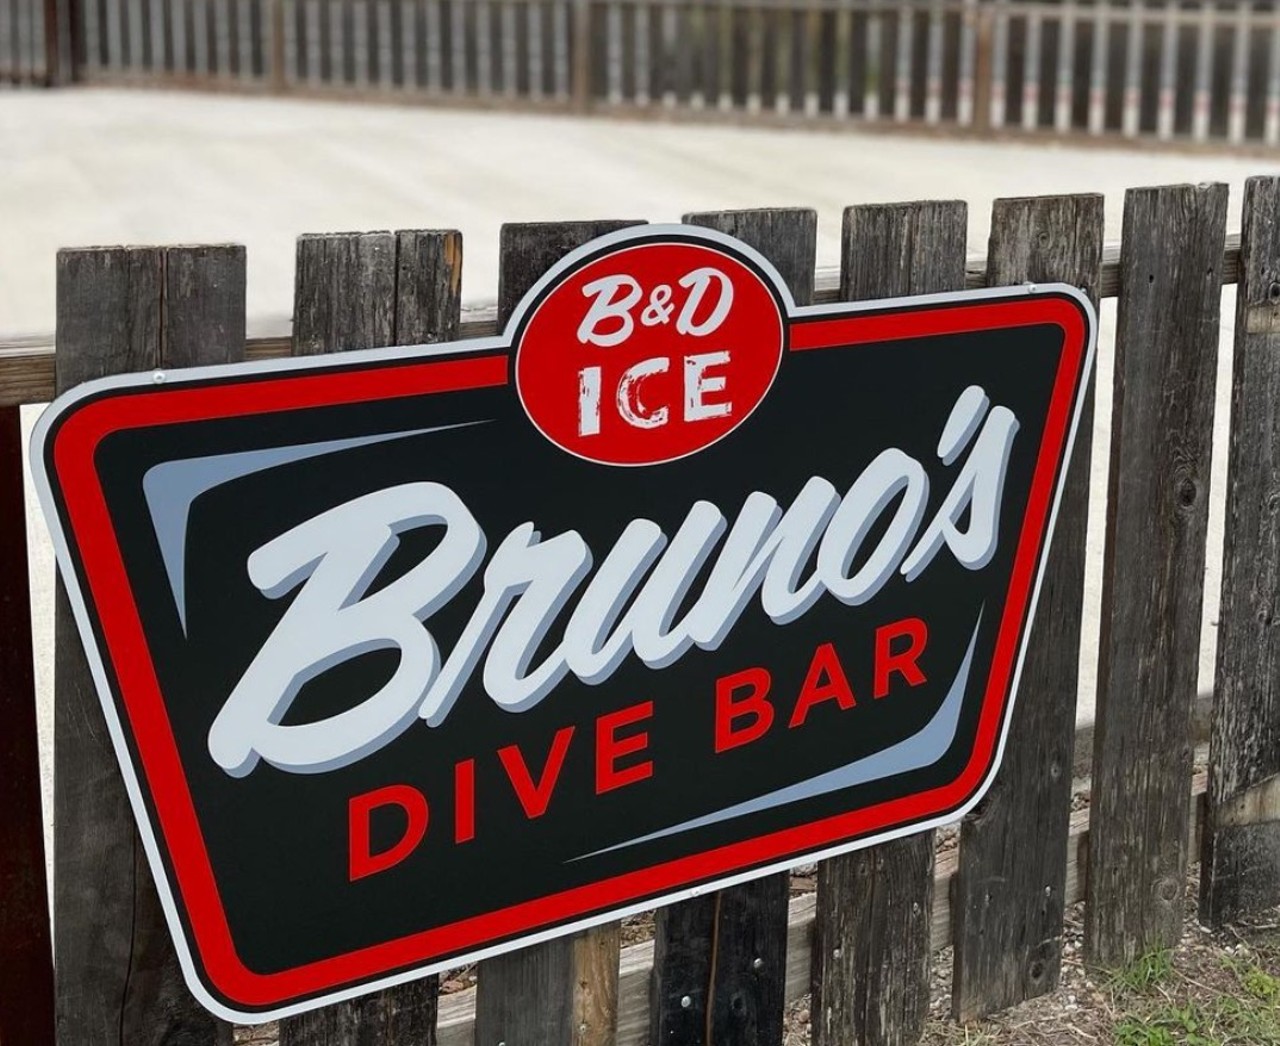 Bruno's Dive Bar
1004 S. Alamo St., (210) 225-9801, brunosdive.com
Owners of neighborhood staple The Friendly Spot Steve and Jody Bailey Newman are breathing new life into a vacant space across the street in Bruno's Dive Bar, which offers well drinks, an IPA on tap, games, tunes from the jukebox and a large patio space. 
Photo via Instagram / brunosdive